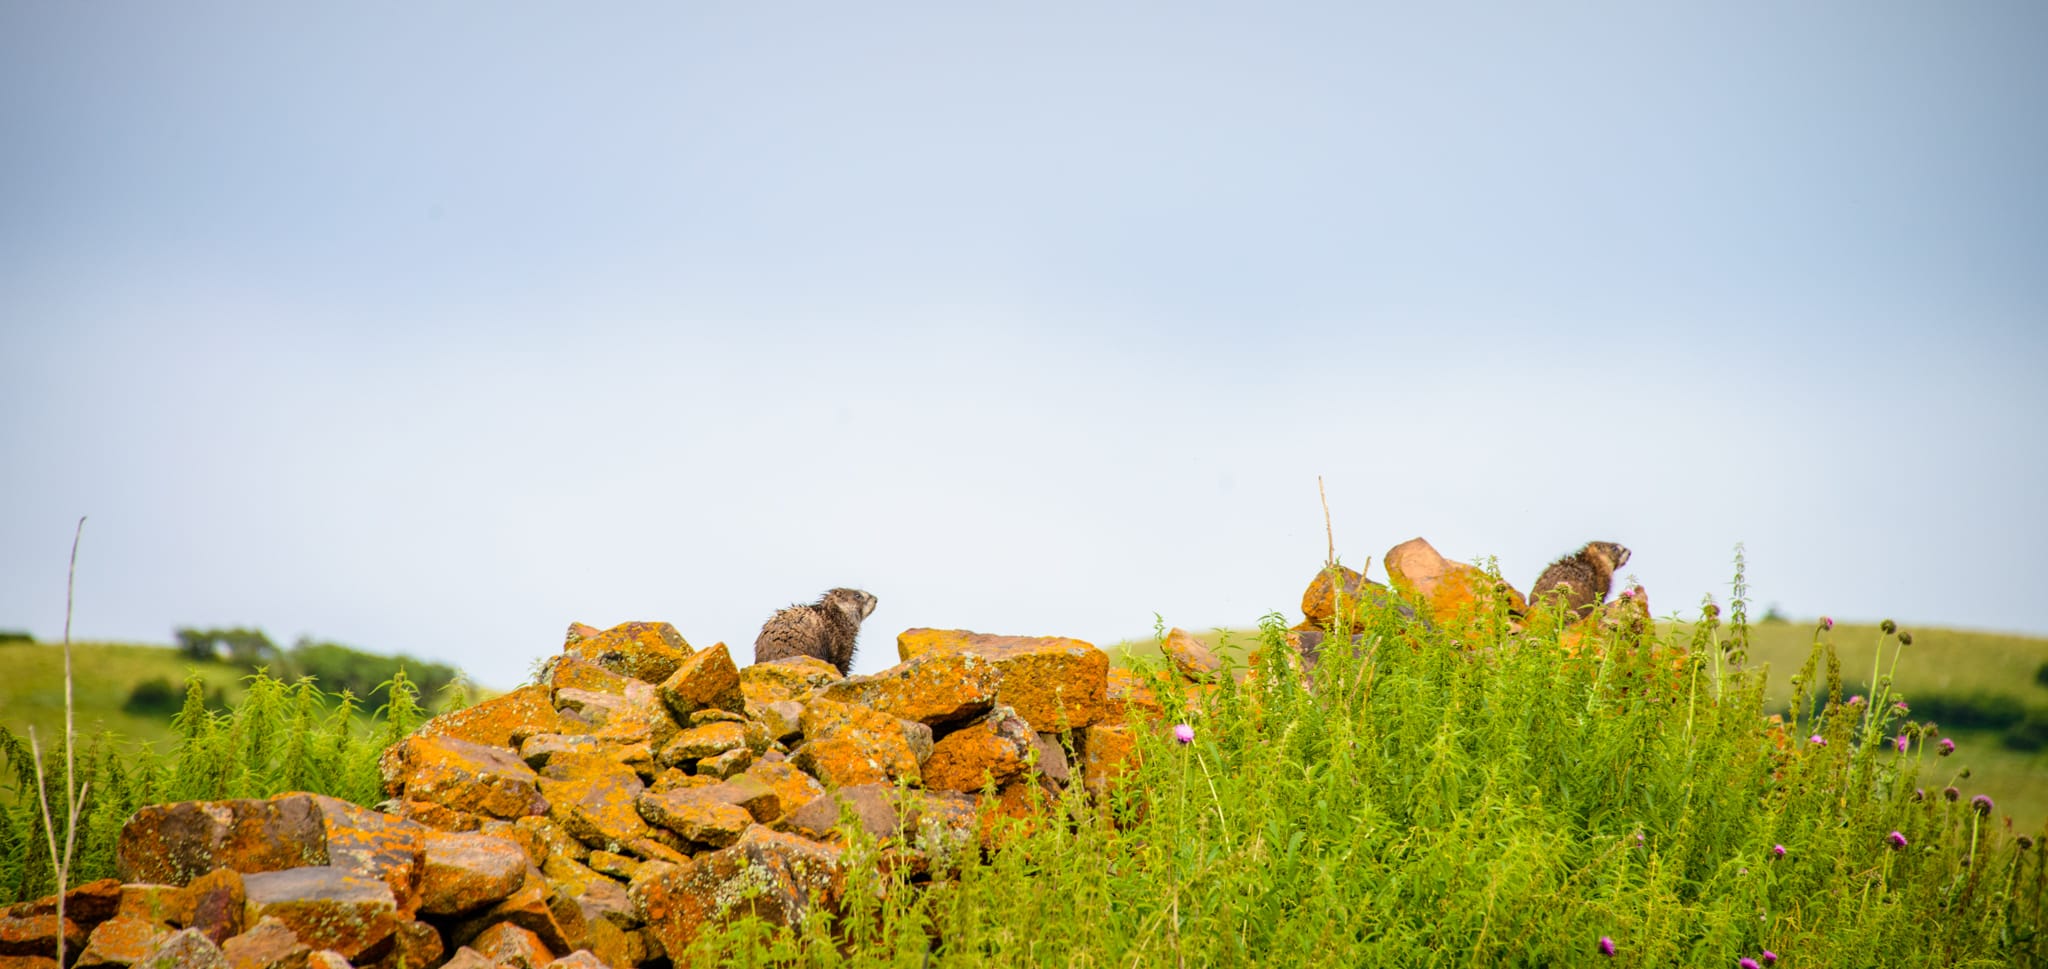 Two Yellow-Bellied Marmots sit atop piles of rock along Sawpits Road near Telluride, Colorado.